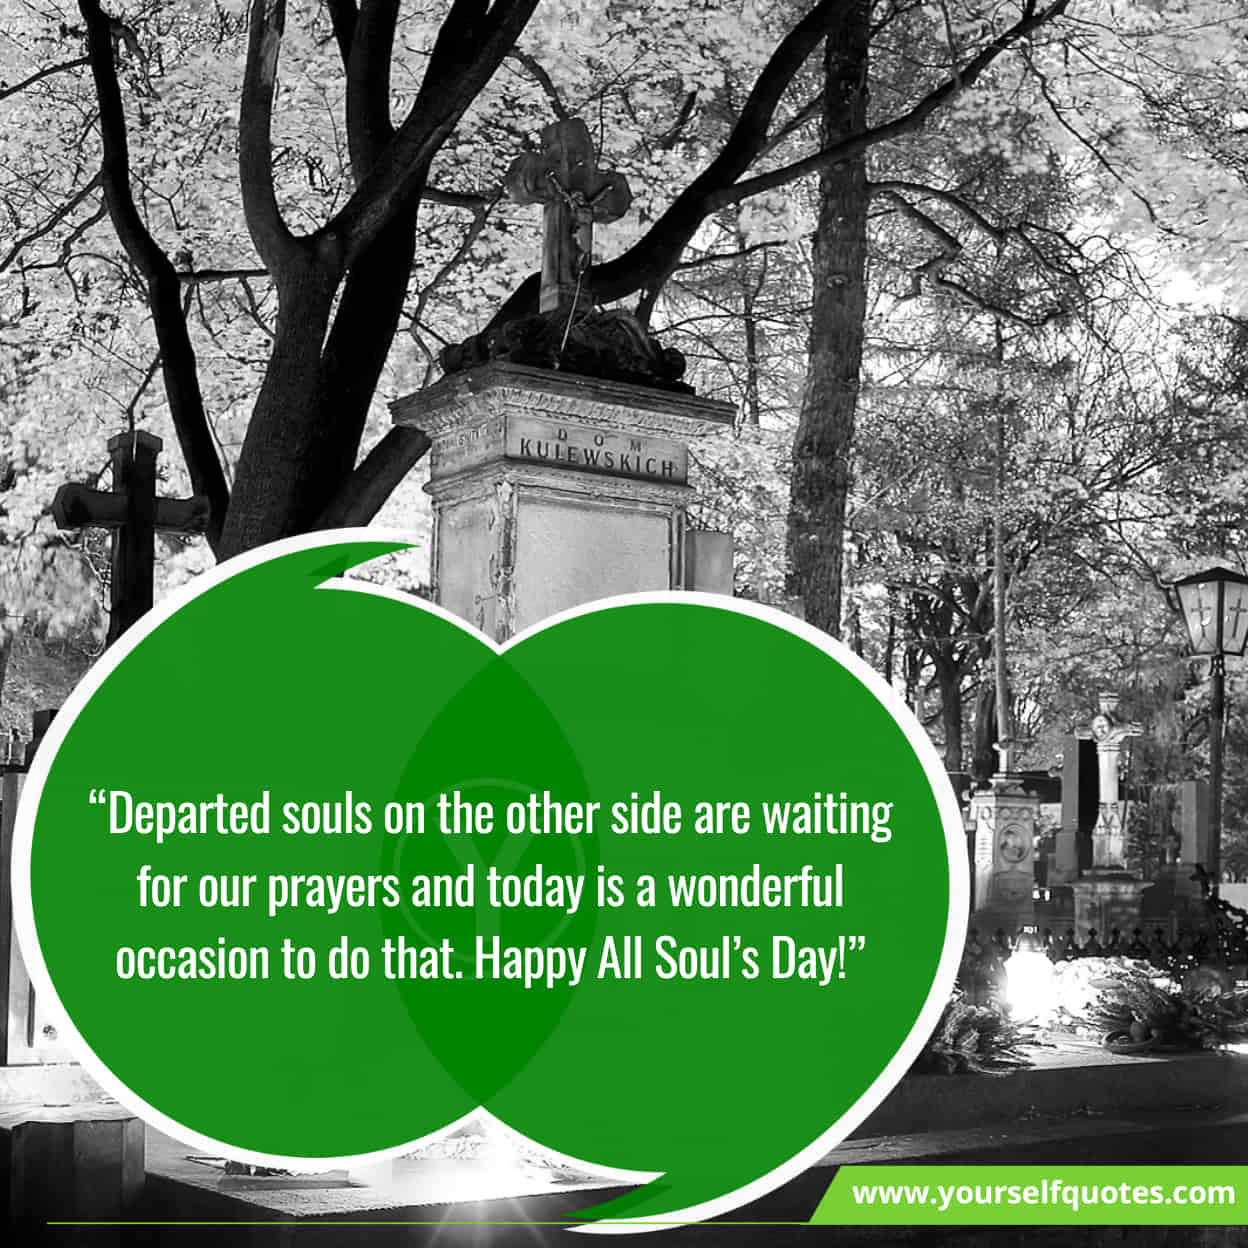 Inspiring Quotes About Happy All Souls Day